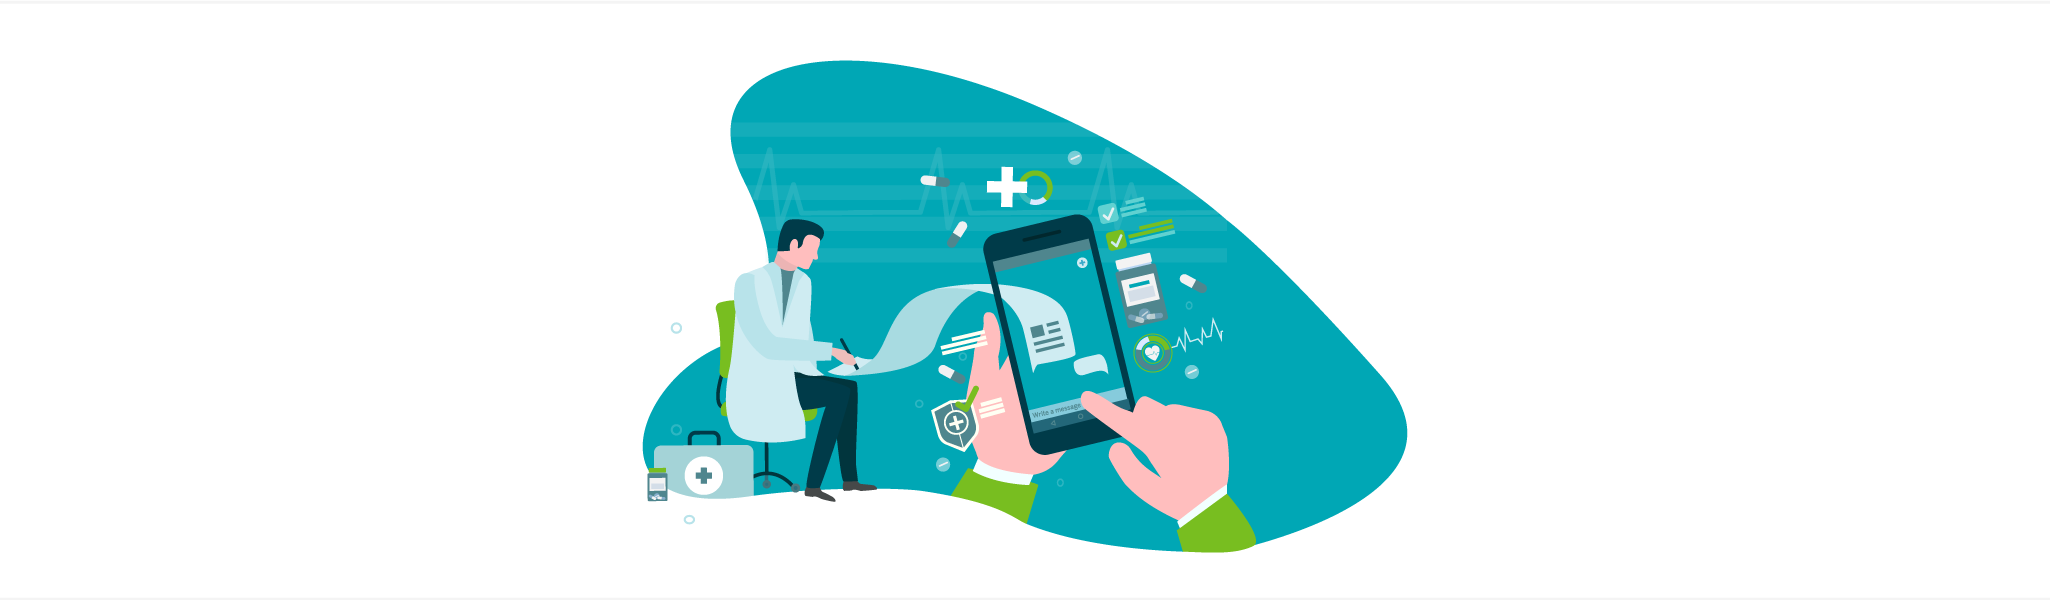 The Power of a Text: Improving Patient-Centered Care